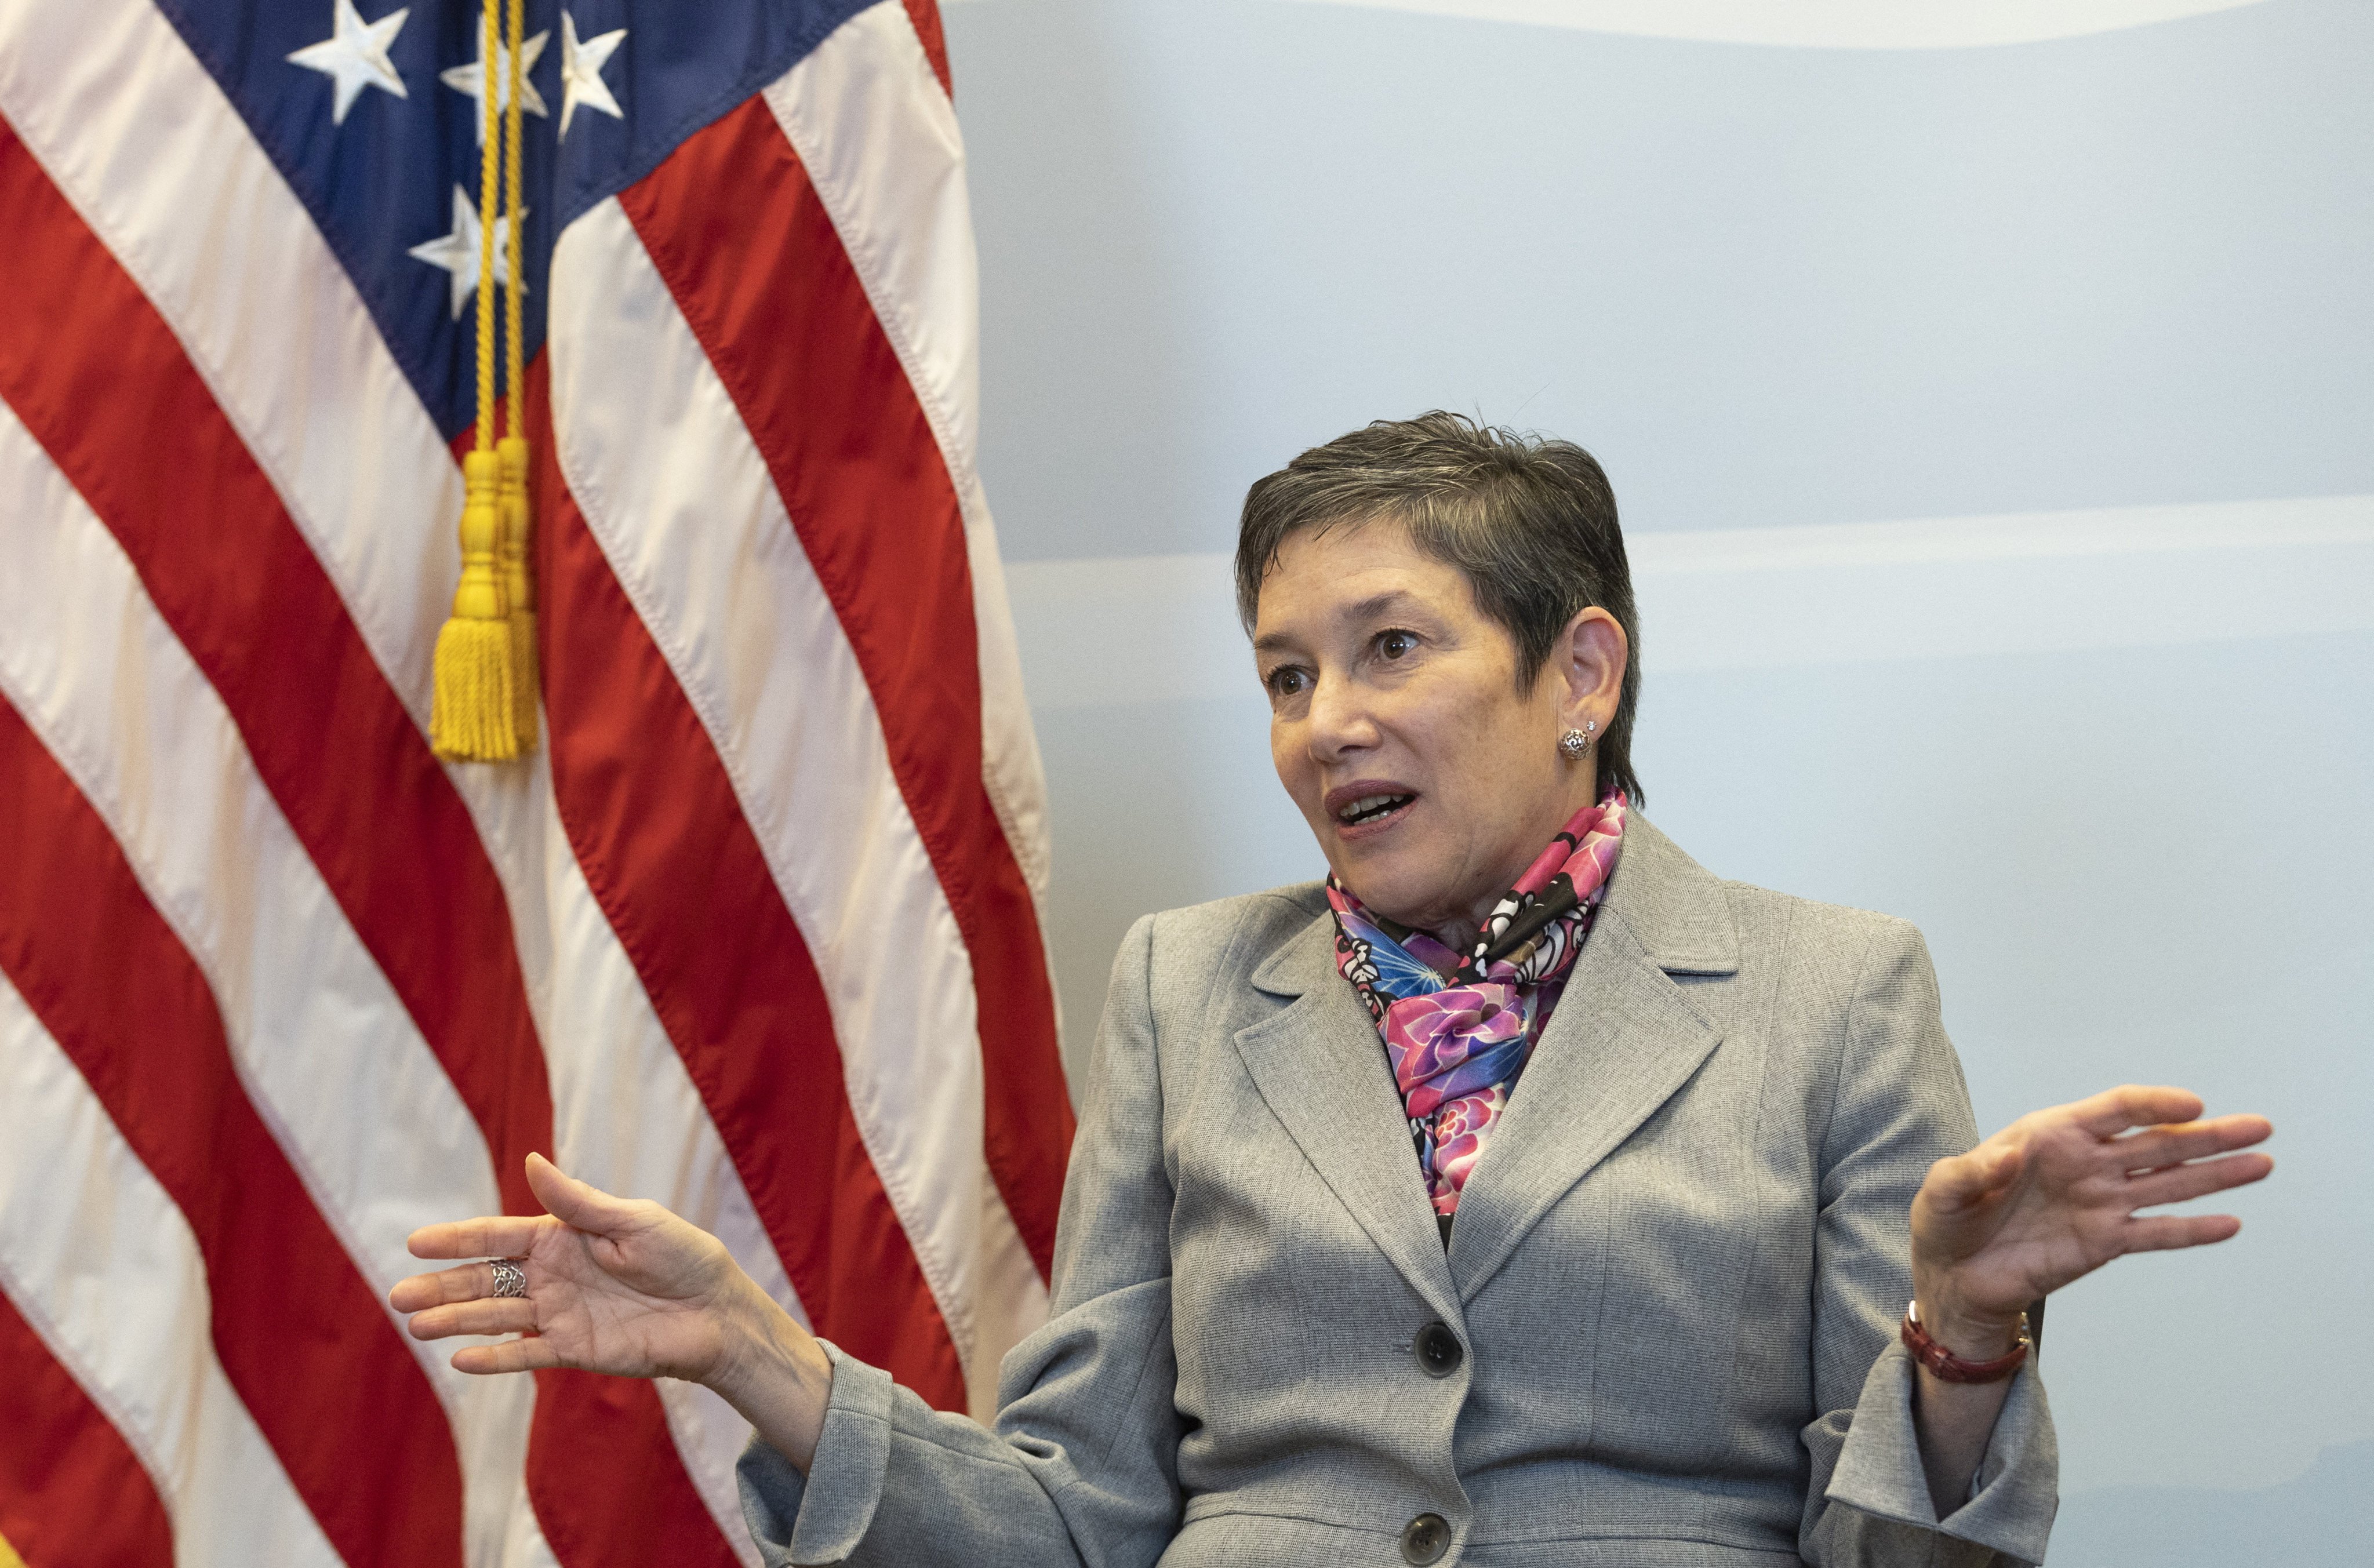 Maria Pagan, US ambassador to the WTO, gestures during an interview in Geneva, Switzerland, on January 26. America has wilfully strangled the WTO’s dispute settlement function, one of its most important roles. Photo: Reuters